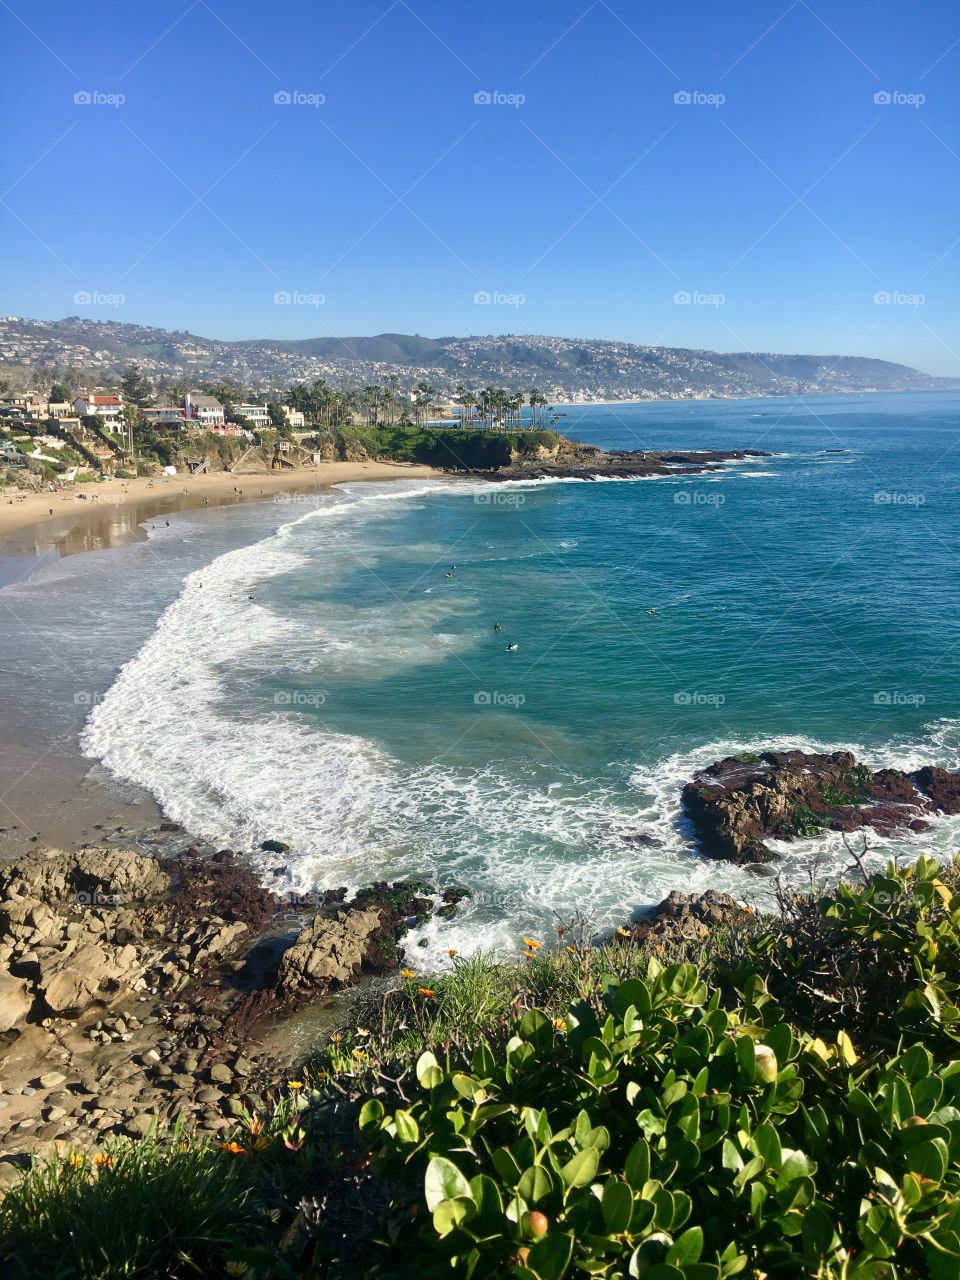 A lovely afternoon in Laguna Beach after the rain